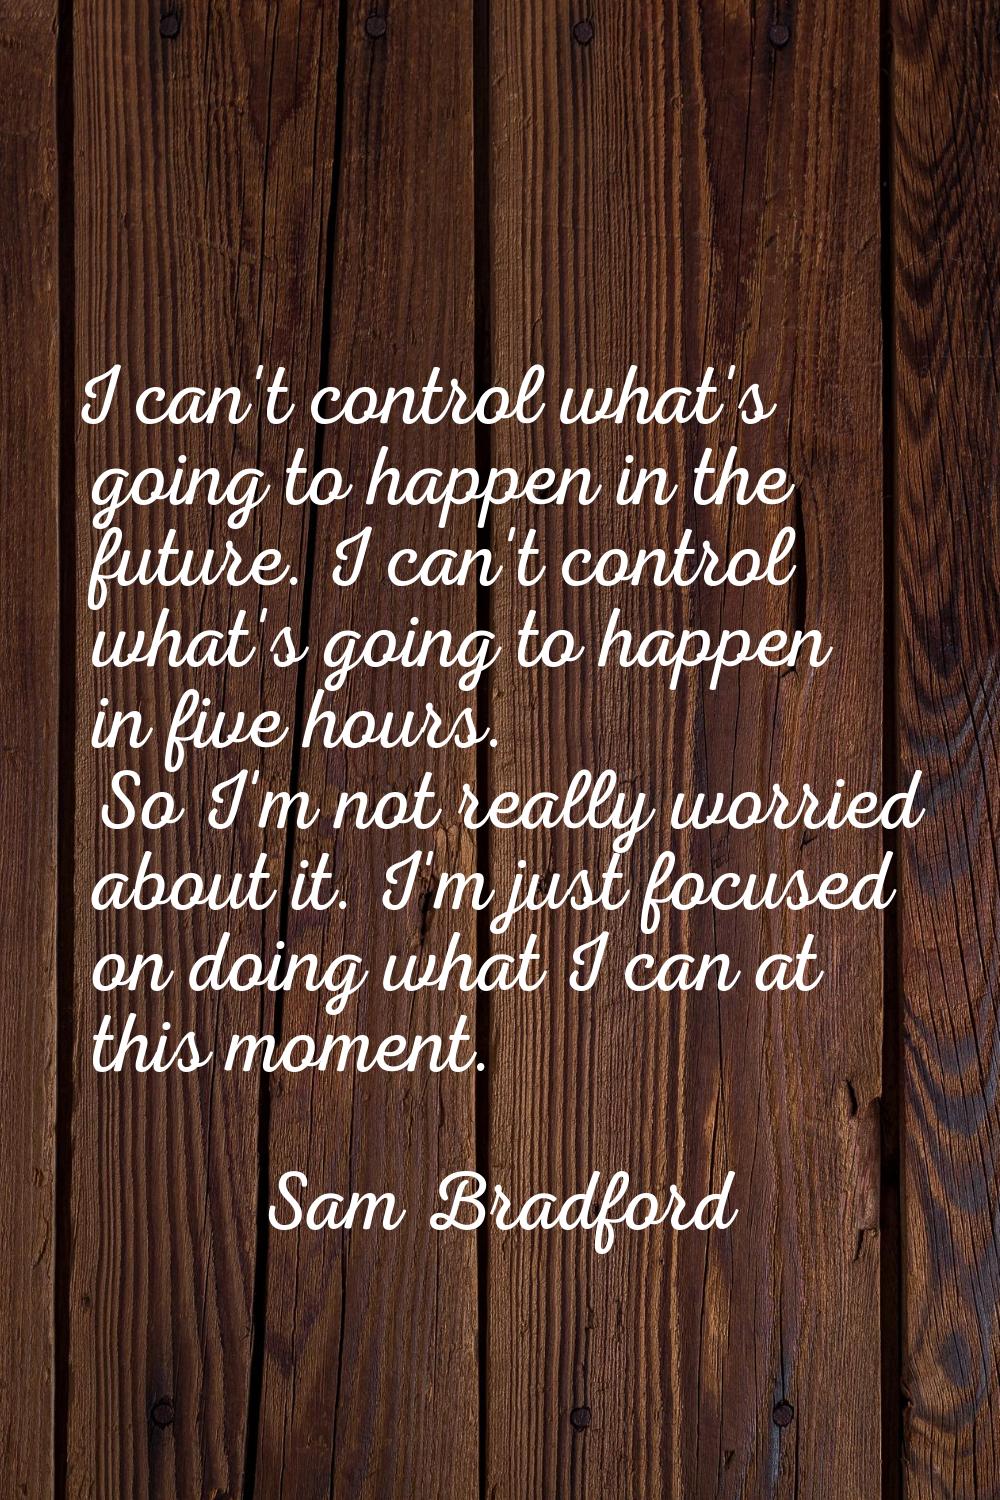 I can't control what's going to happen in the future. I can't control what's going to happen in fiv